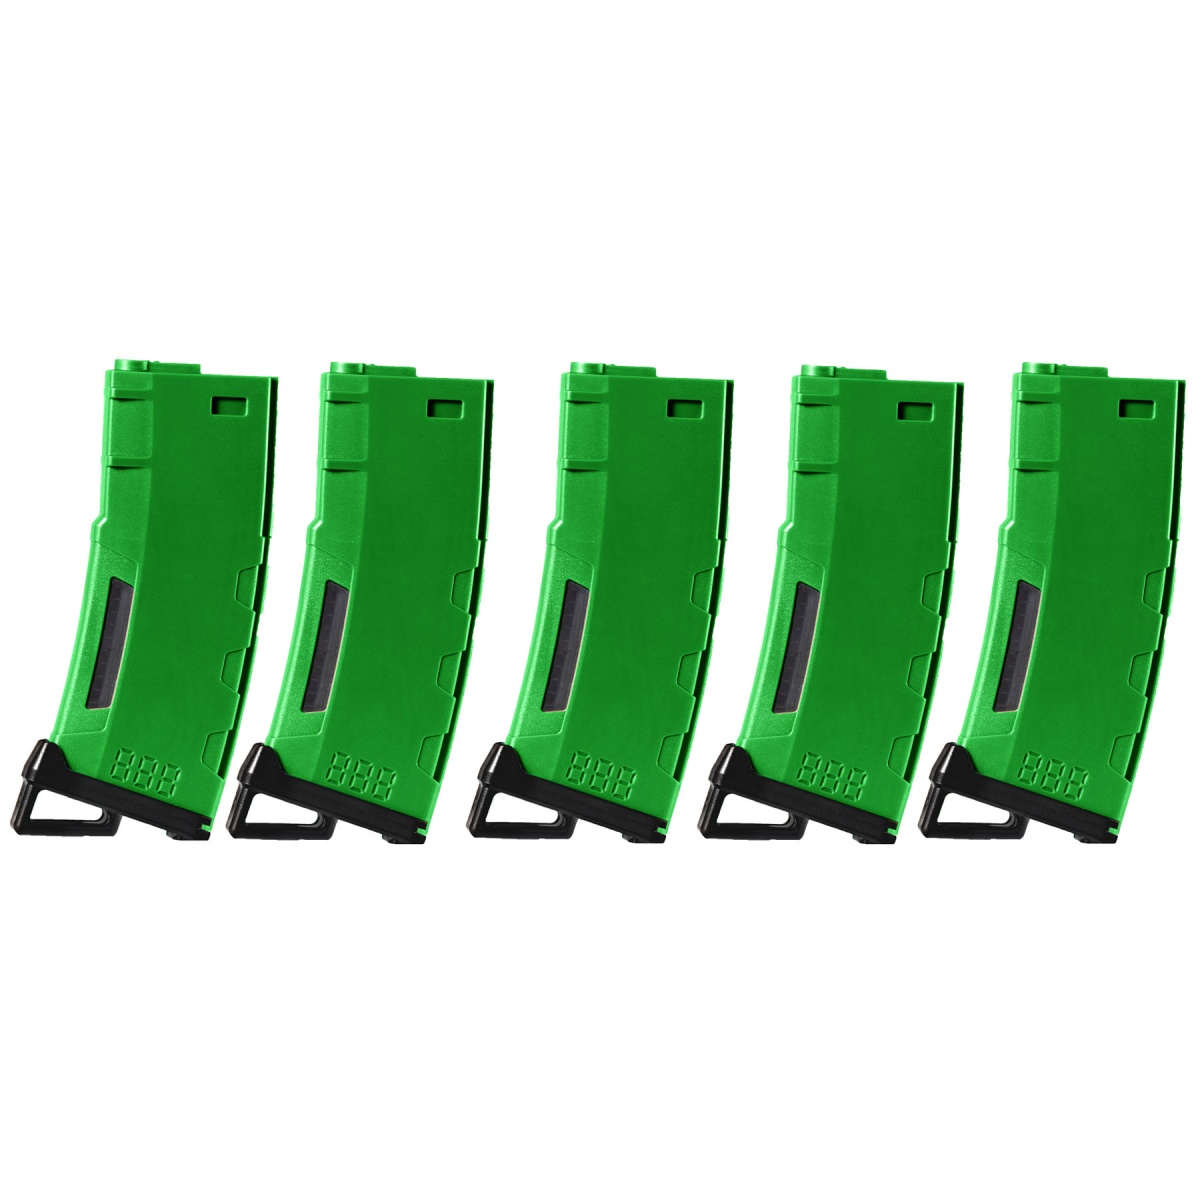 Lancer Tactical AIRSOFT 130 Round High Speed Mid-Cap Magazine Pack of 5 